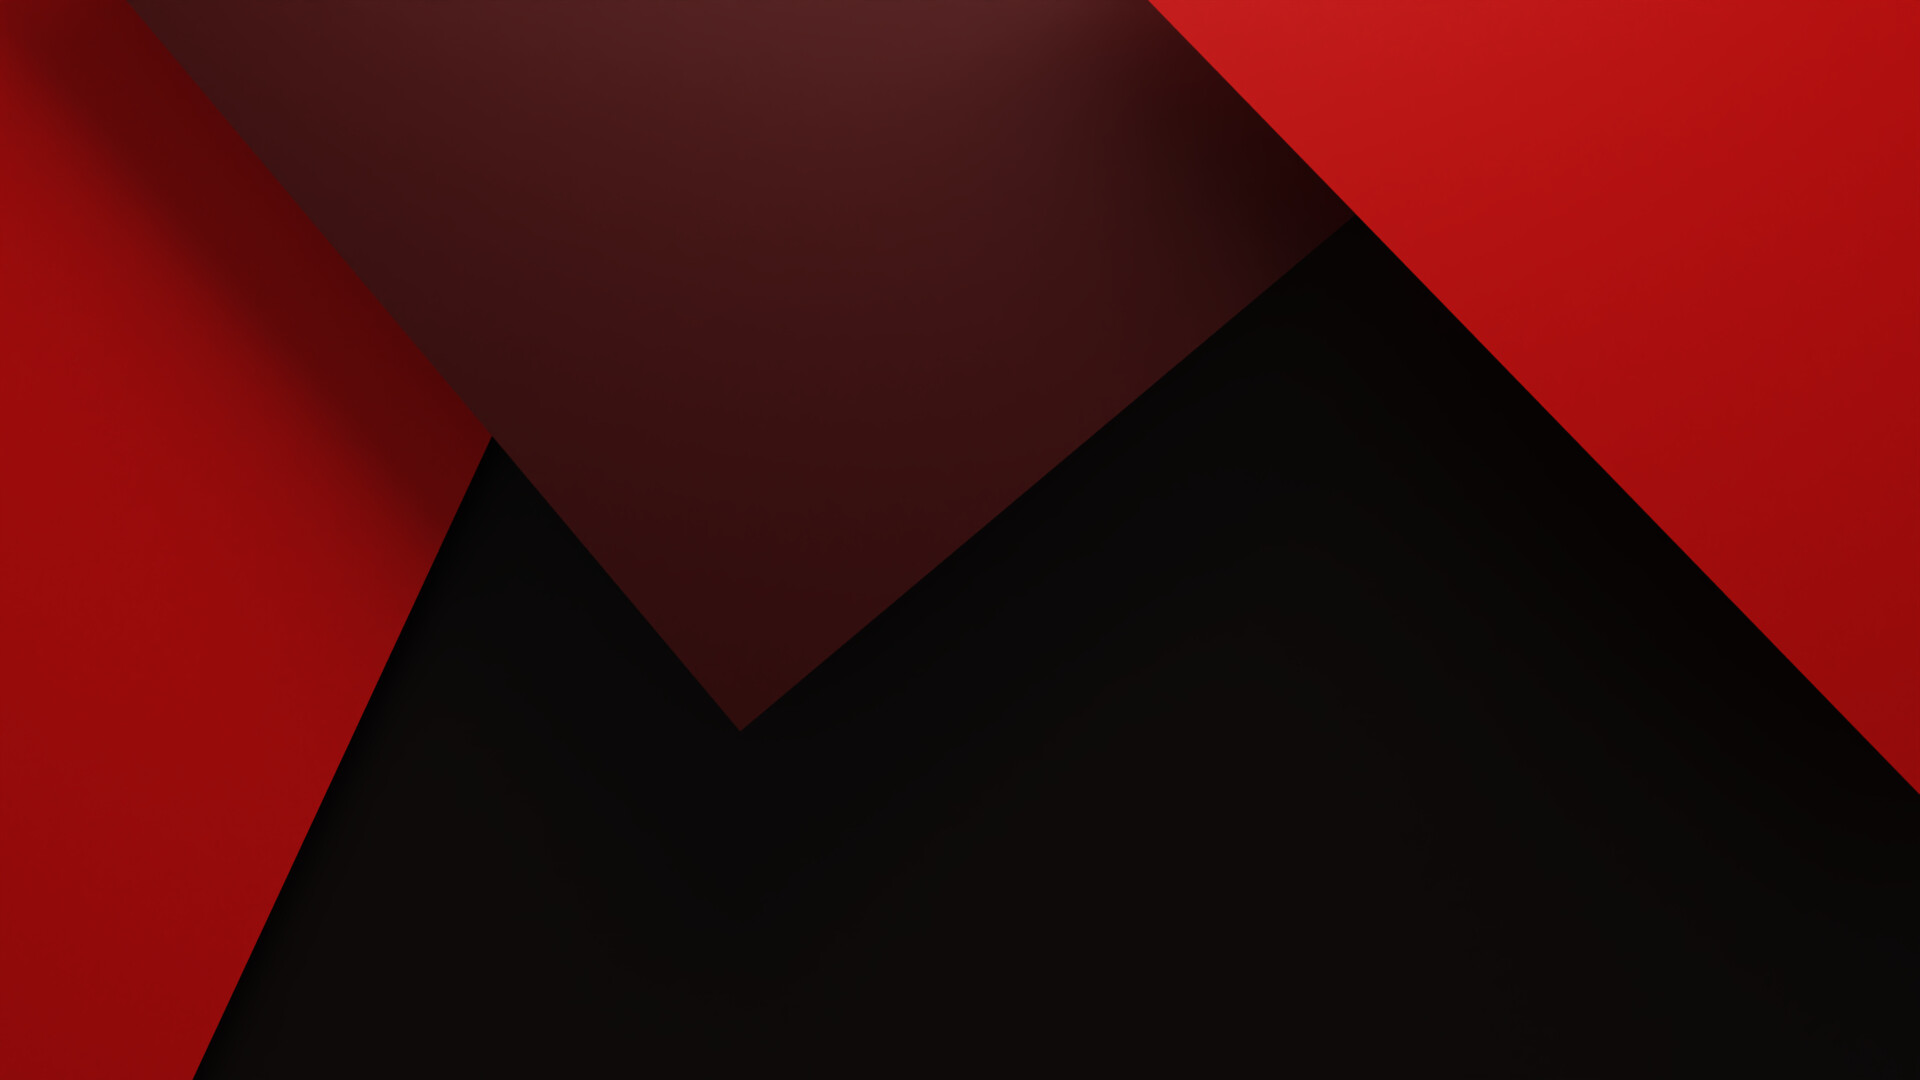 ArtStation - Abstract Wallpapers: Black and Red